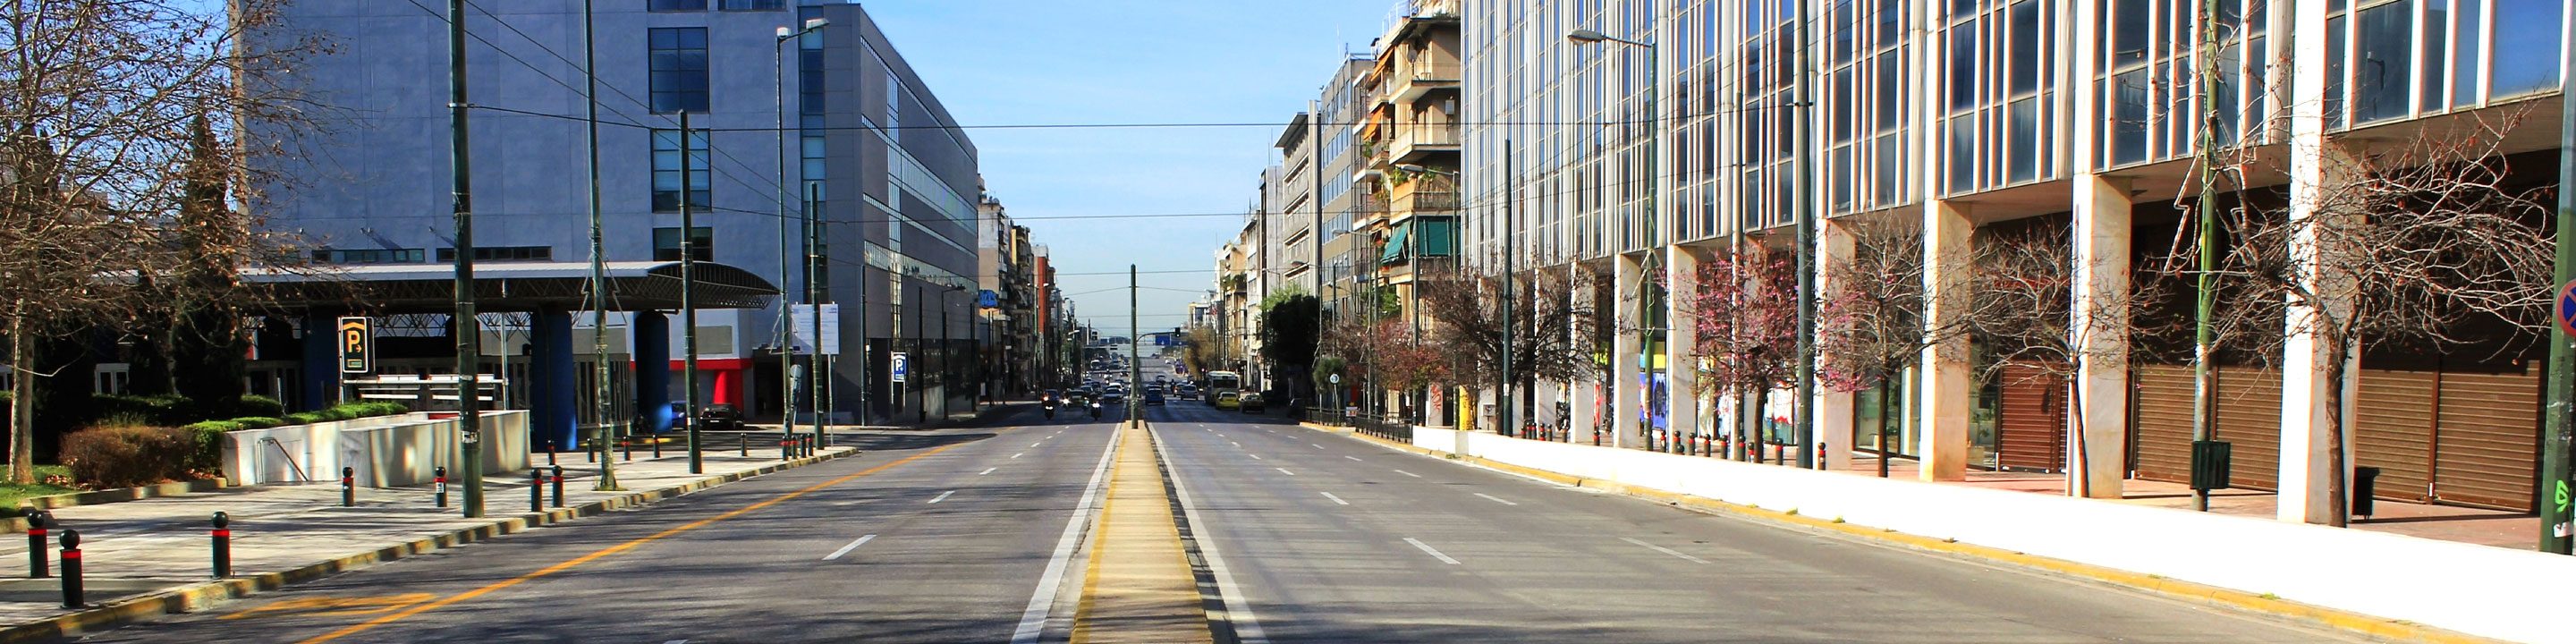 Syngrou Avenue in Athens